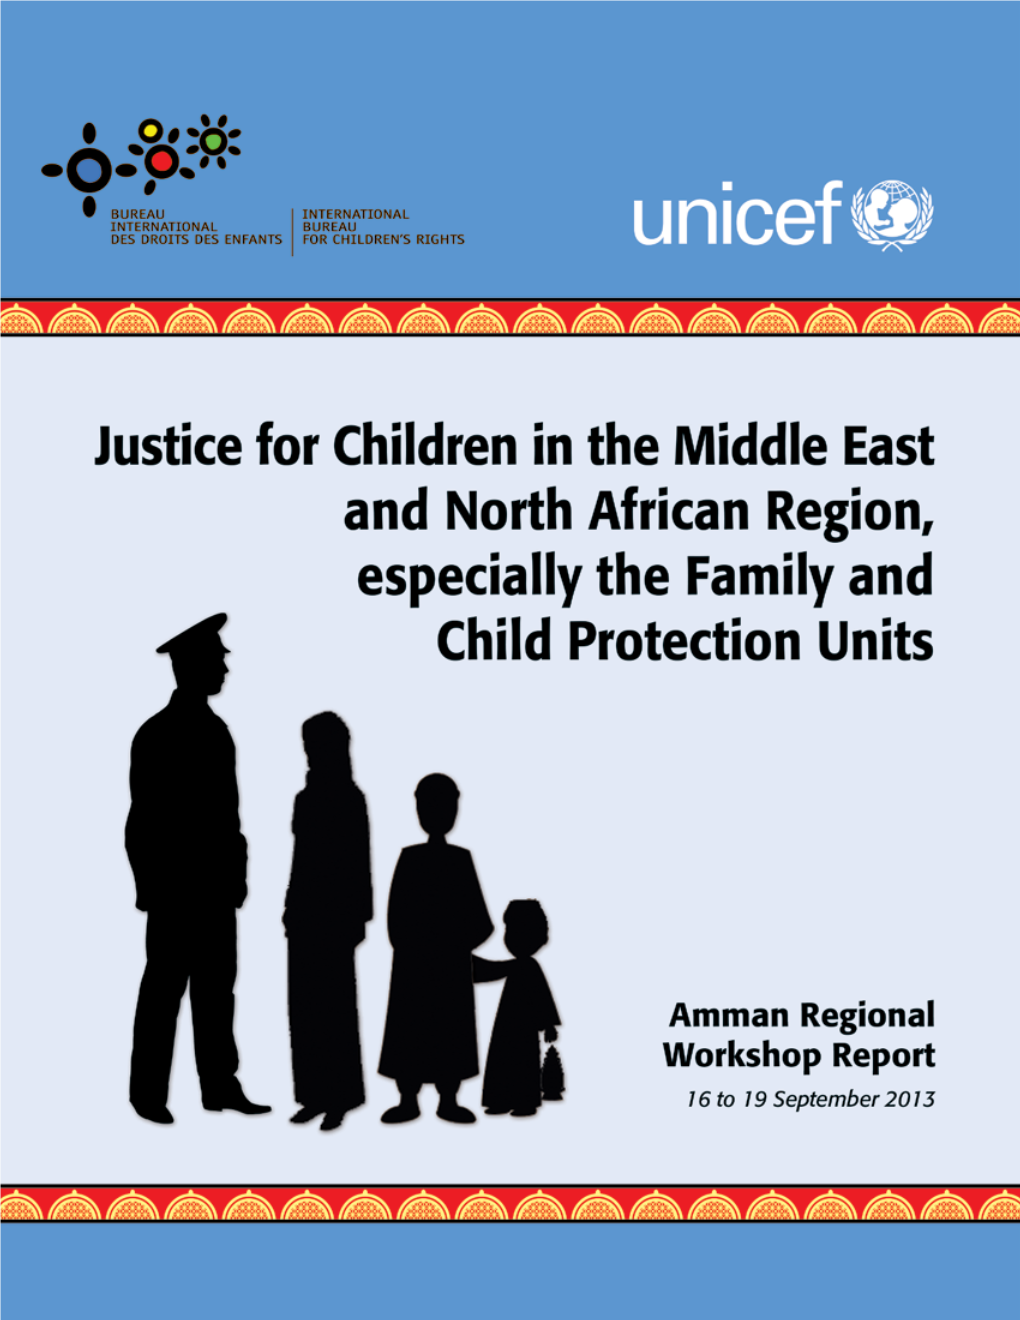 Regional Workshop Report on Justice for Children in the Middle East And